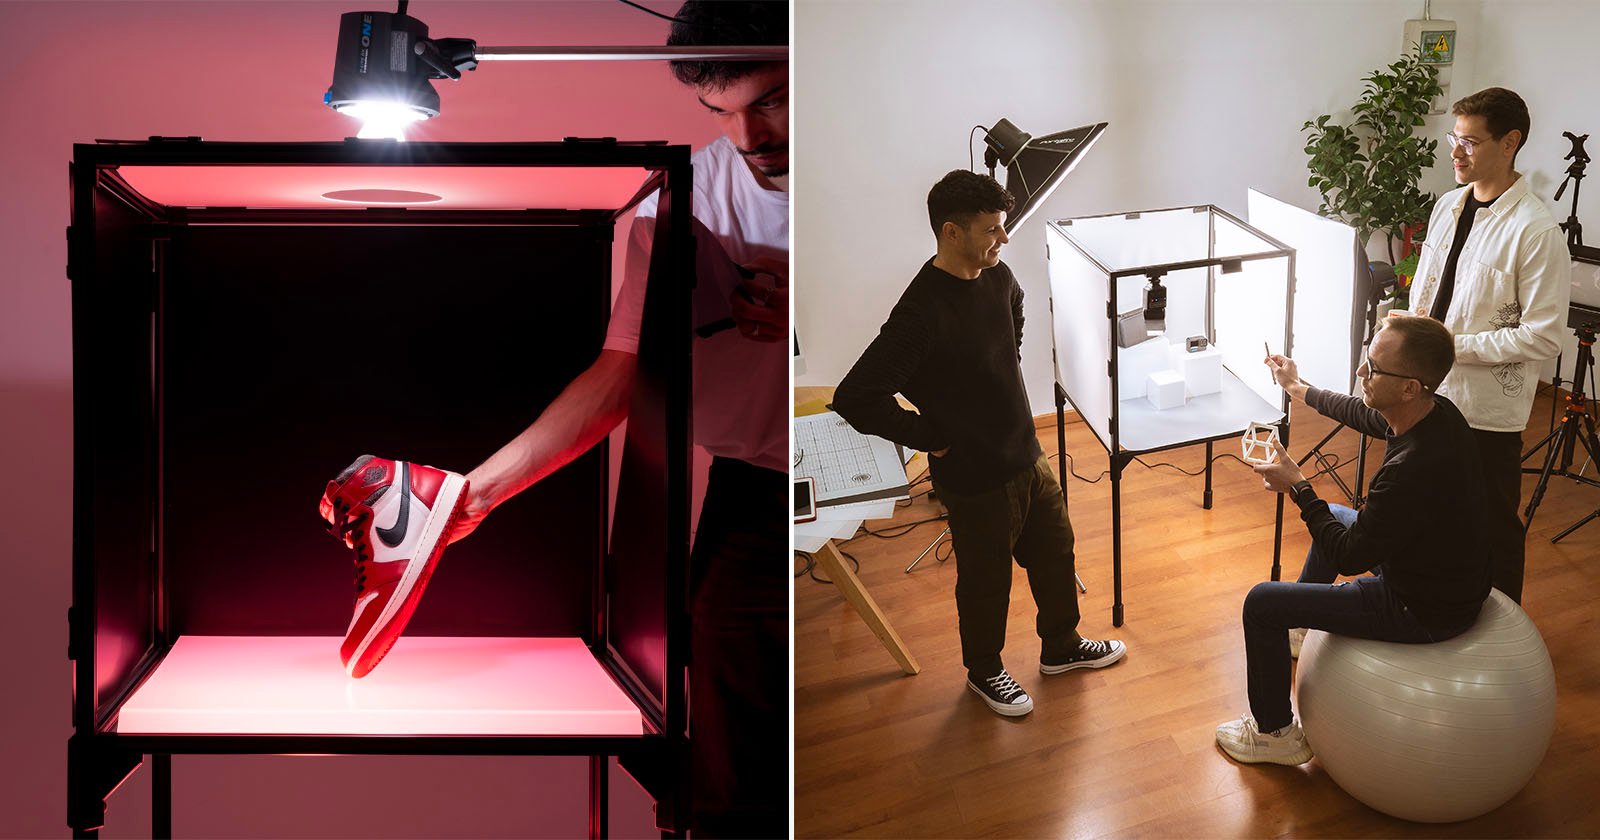 The Xuutbox is a Portable Magnetic Box That Brings the Studio Anywhere